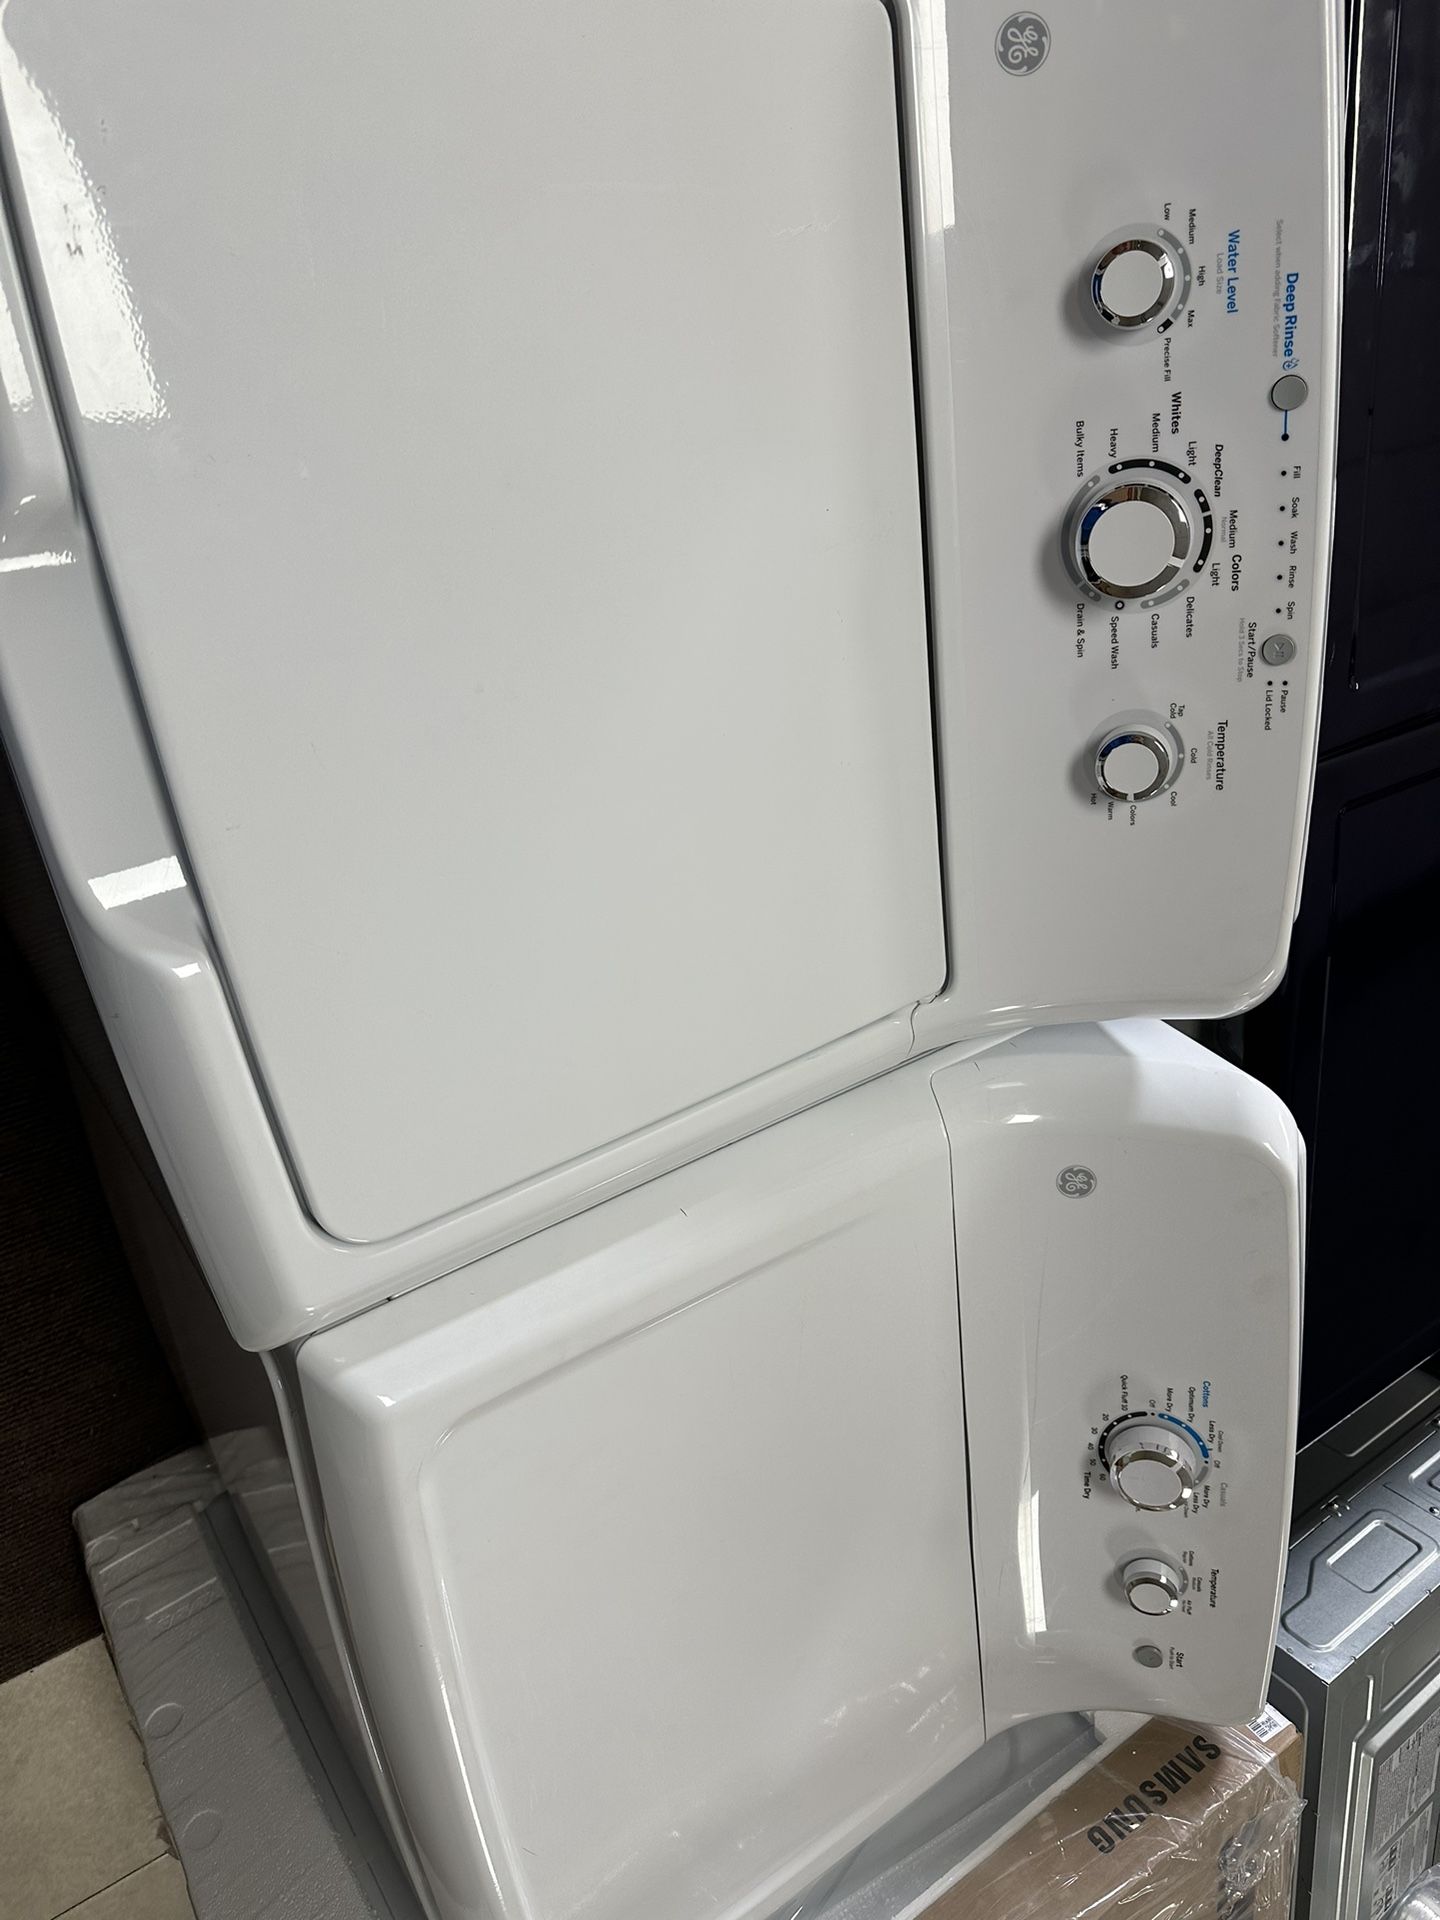 GE Washer Rand And Dryer Electric Set 